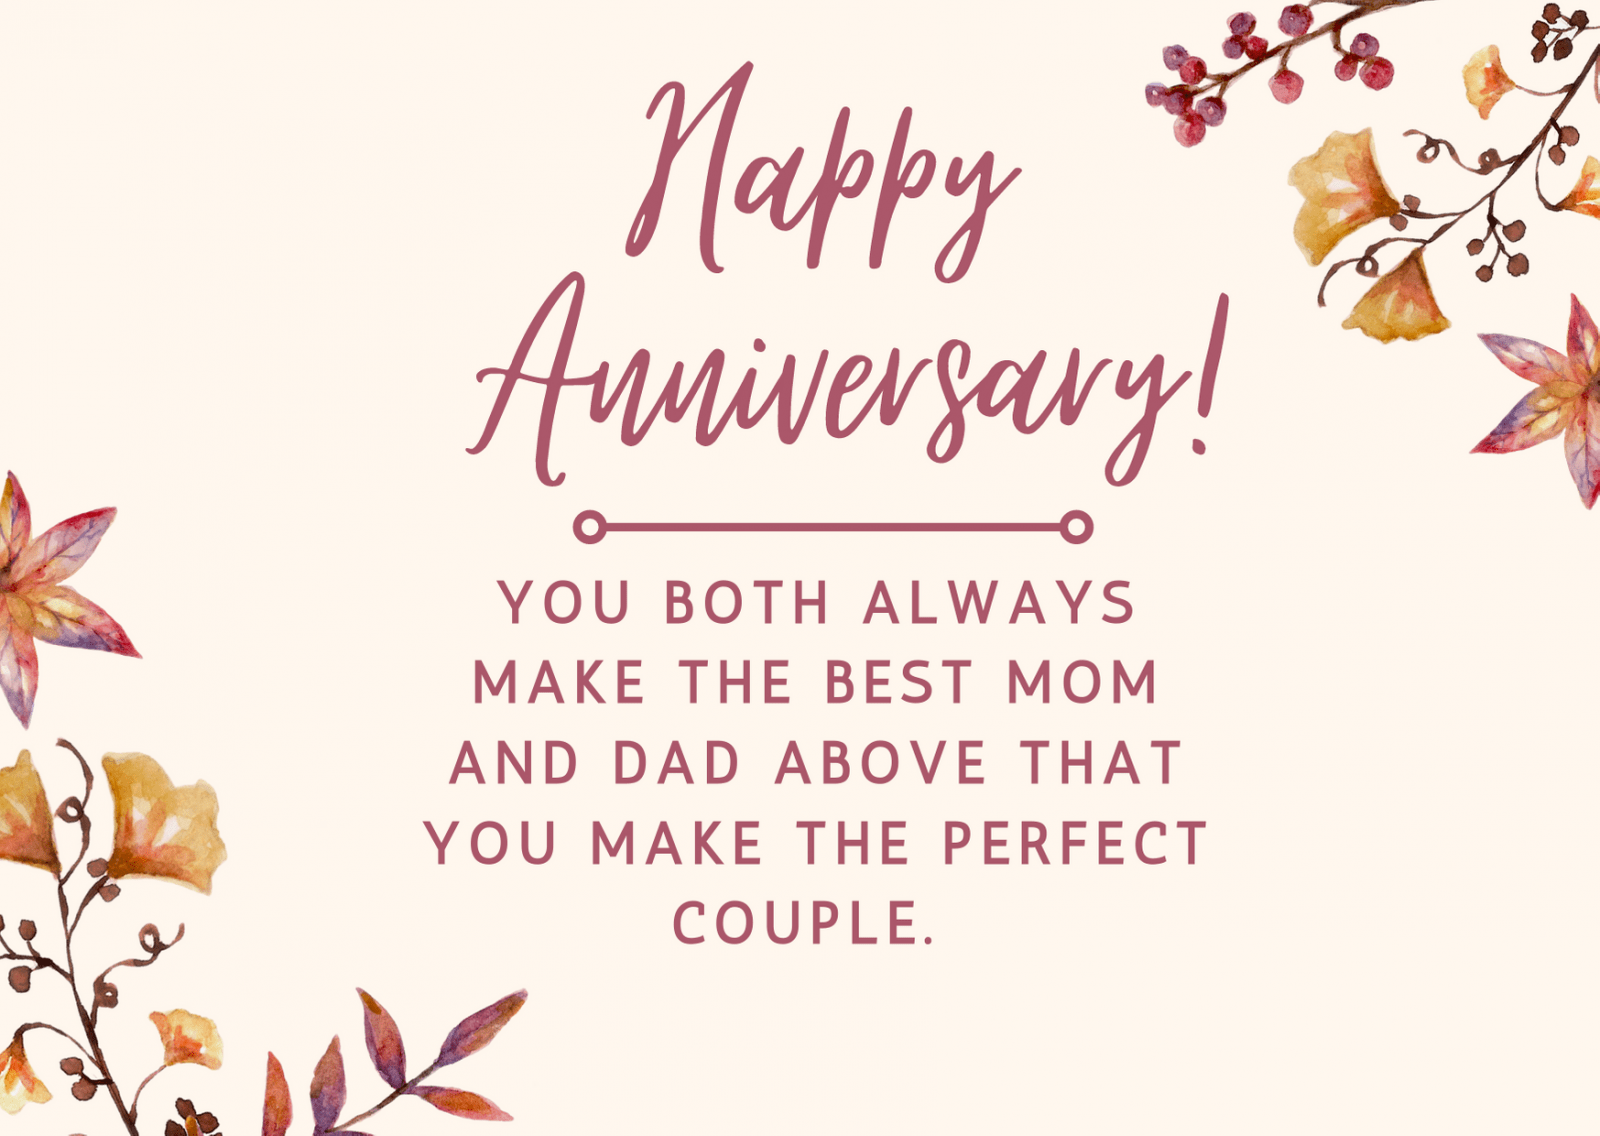 happy anniversary wishes for parents